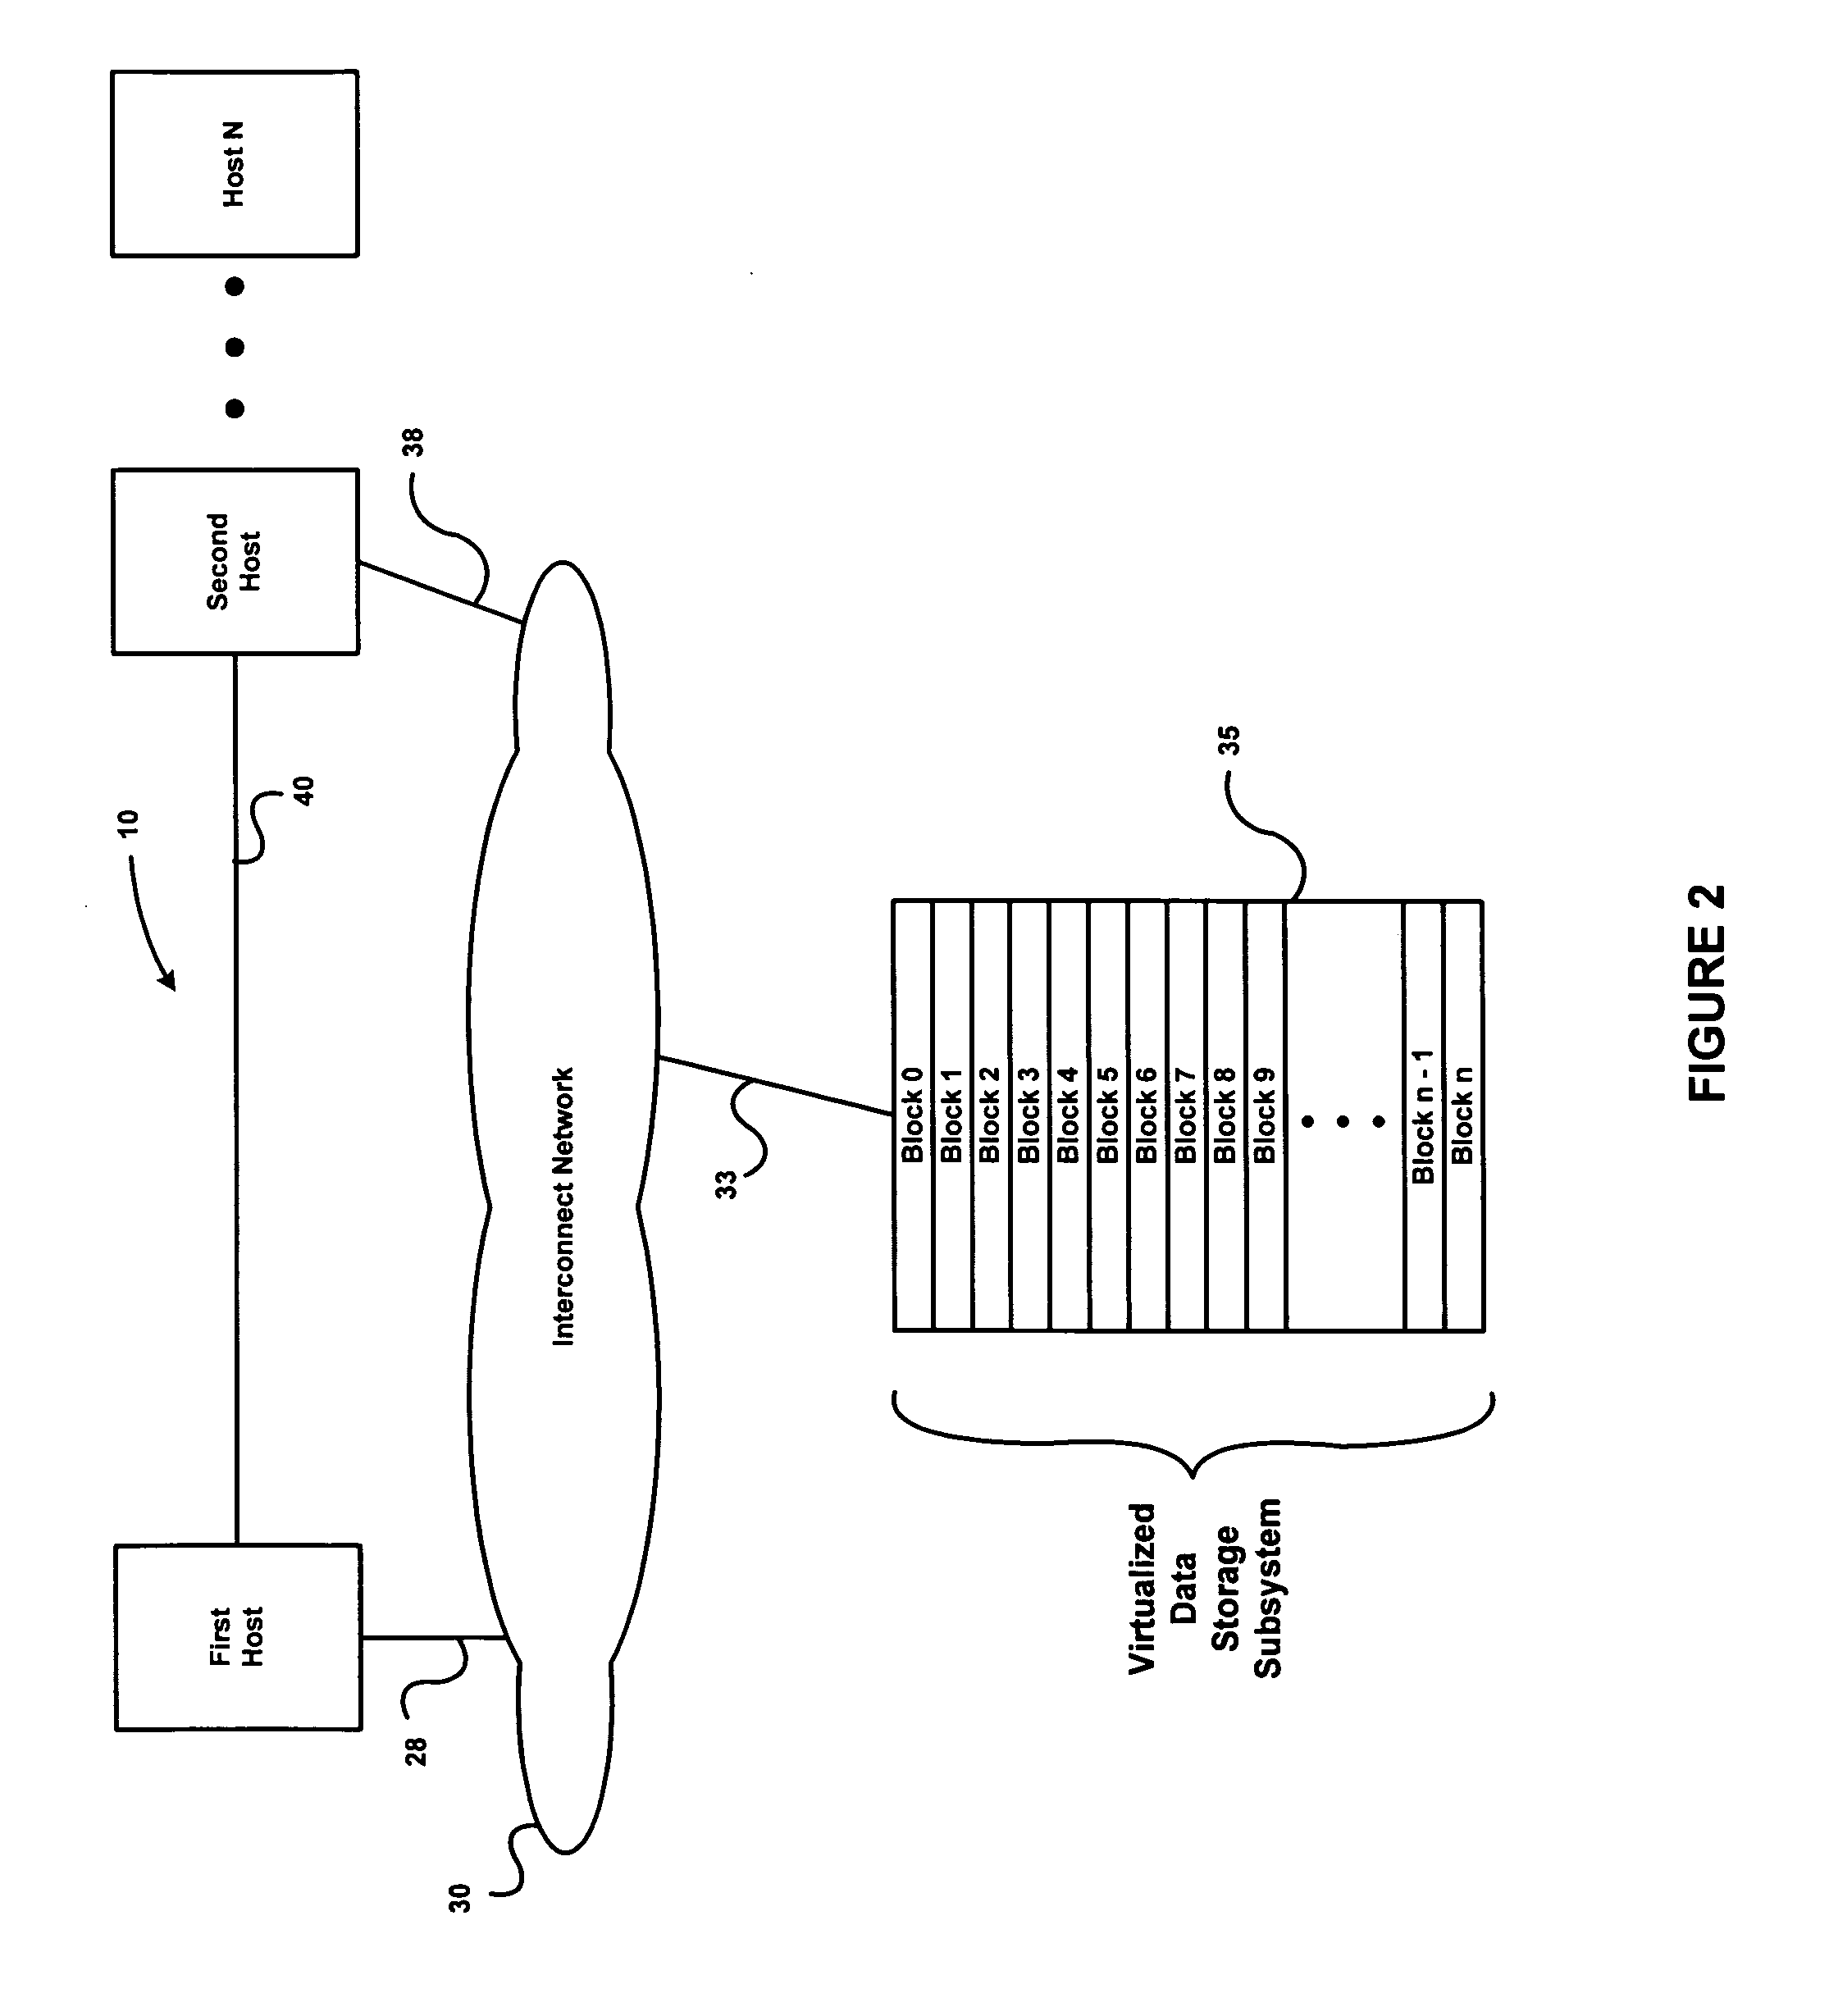 Systems and methods of searching for and determining modified blocks in a file system